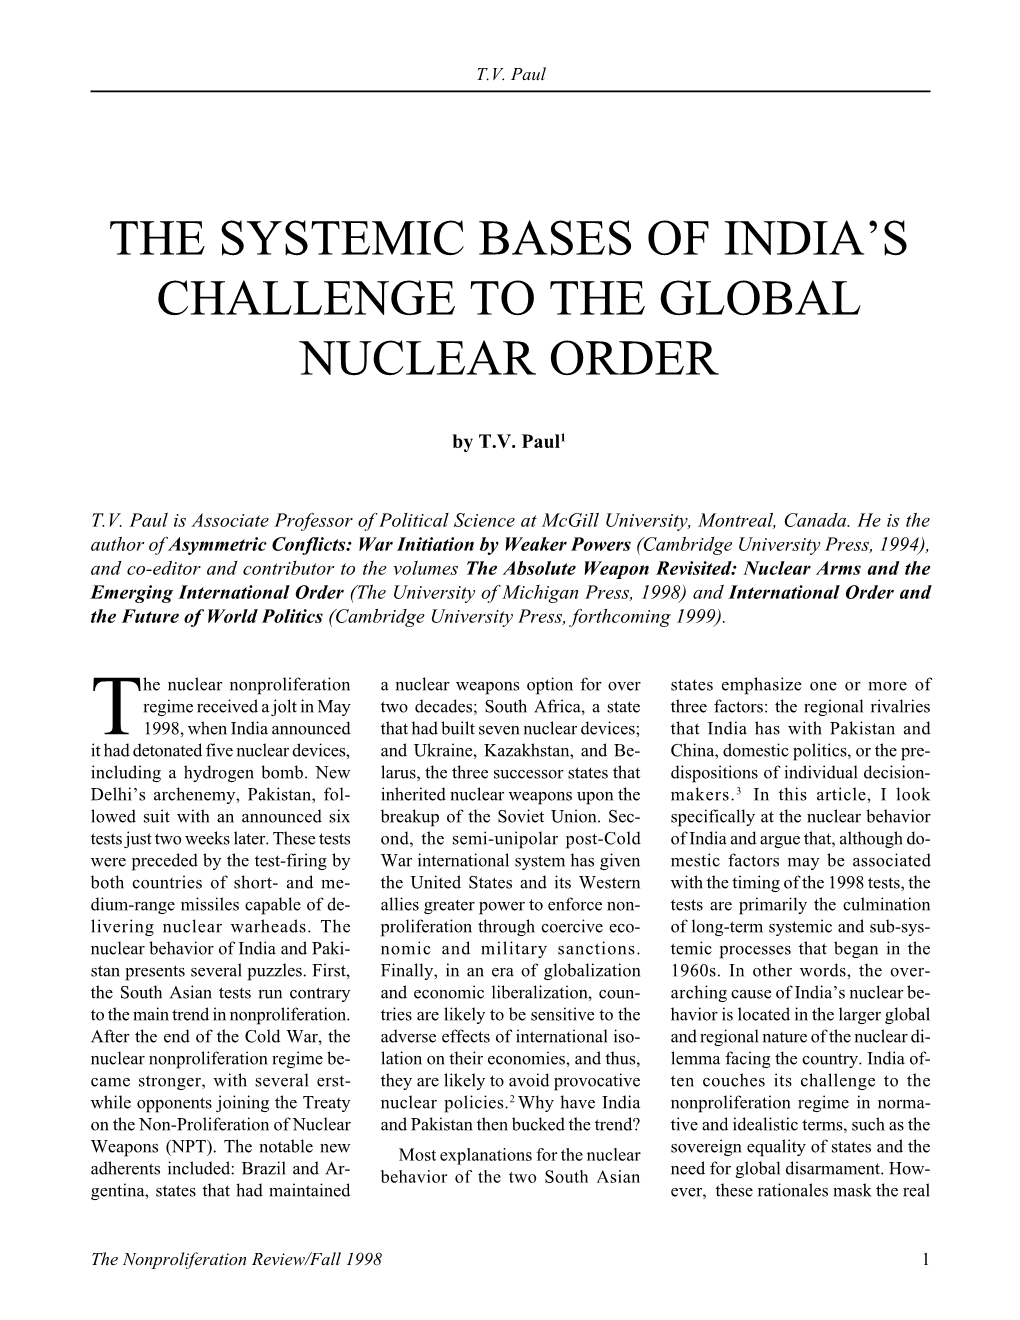 Npr 6.1: the Systemic Bases of India's Challenge to The